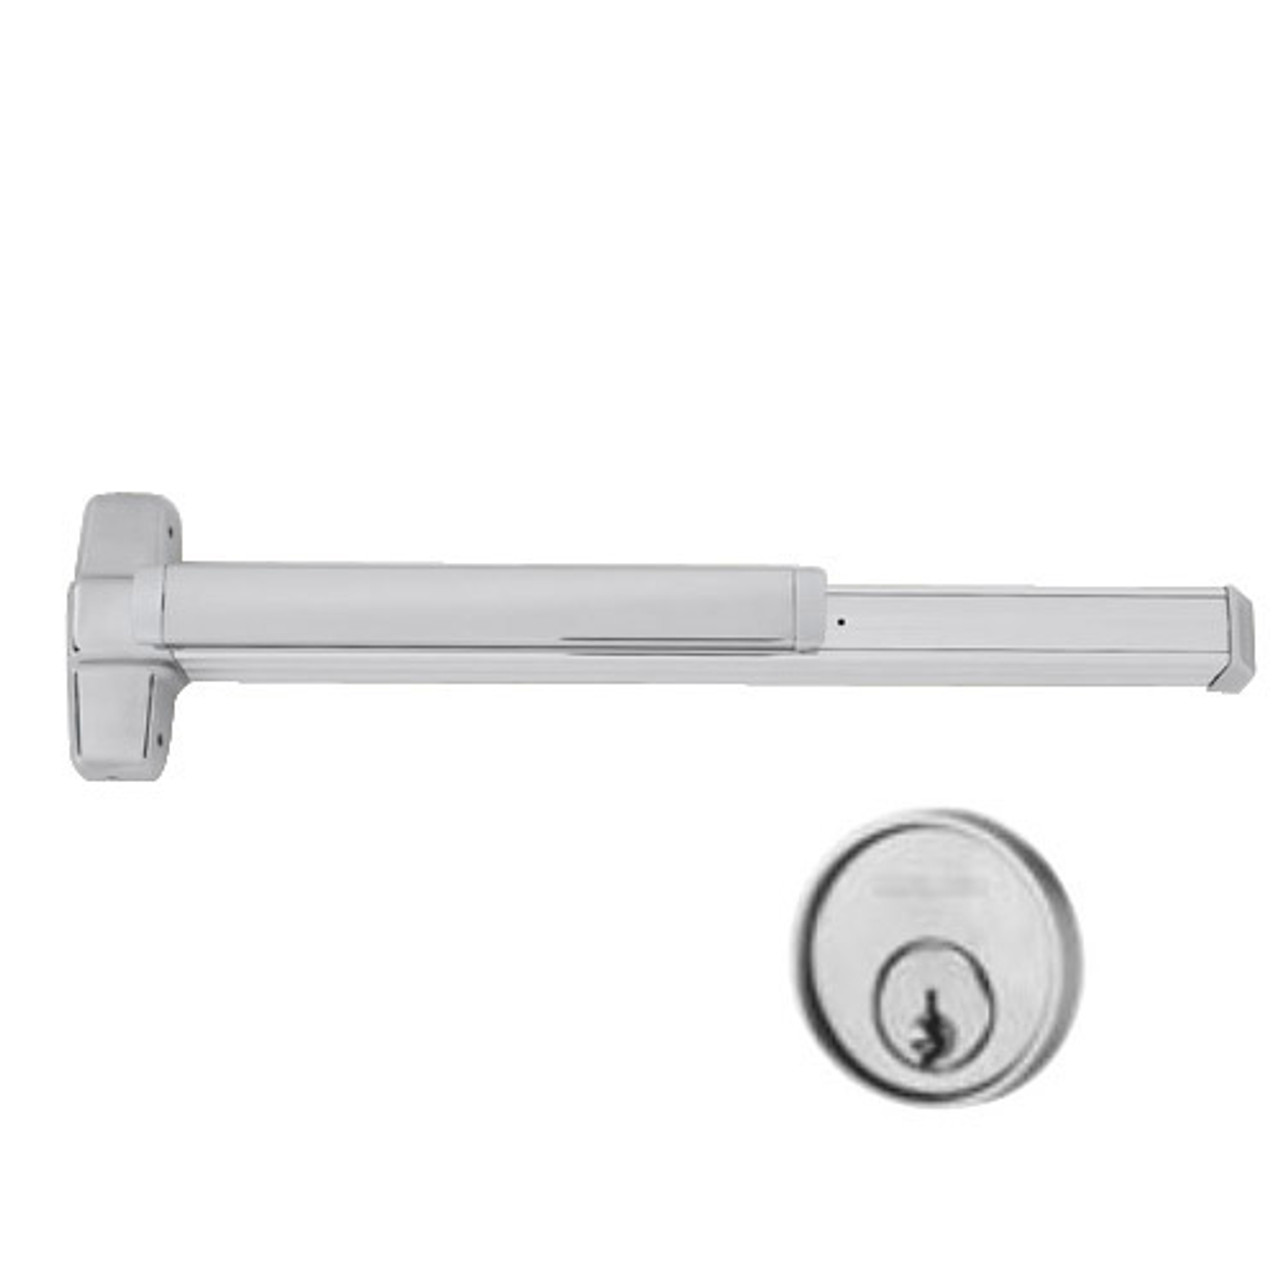 LD-9850WDC-NL-OP-US32D-4 Von Duprin Exit Device in Satin Stainless